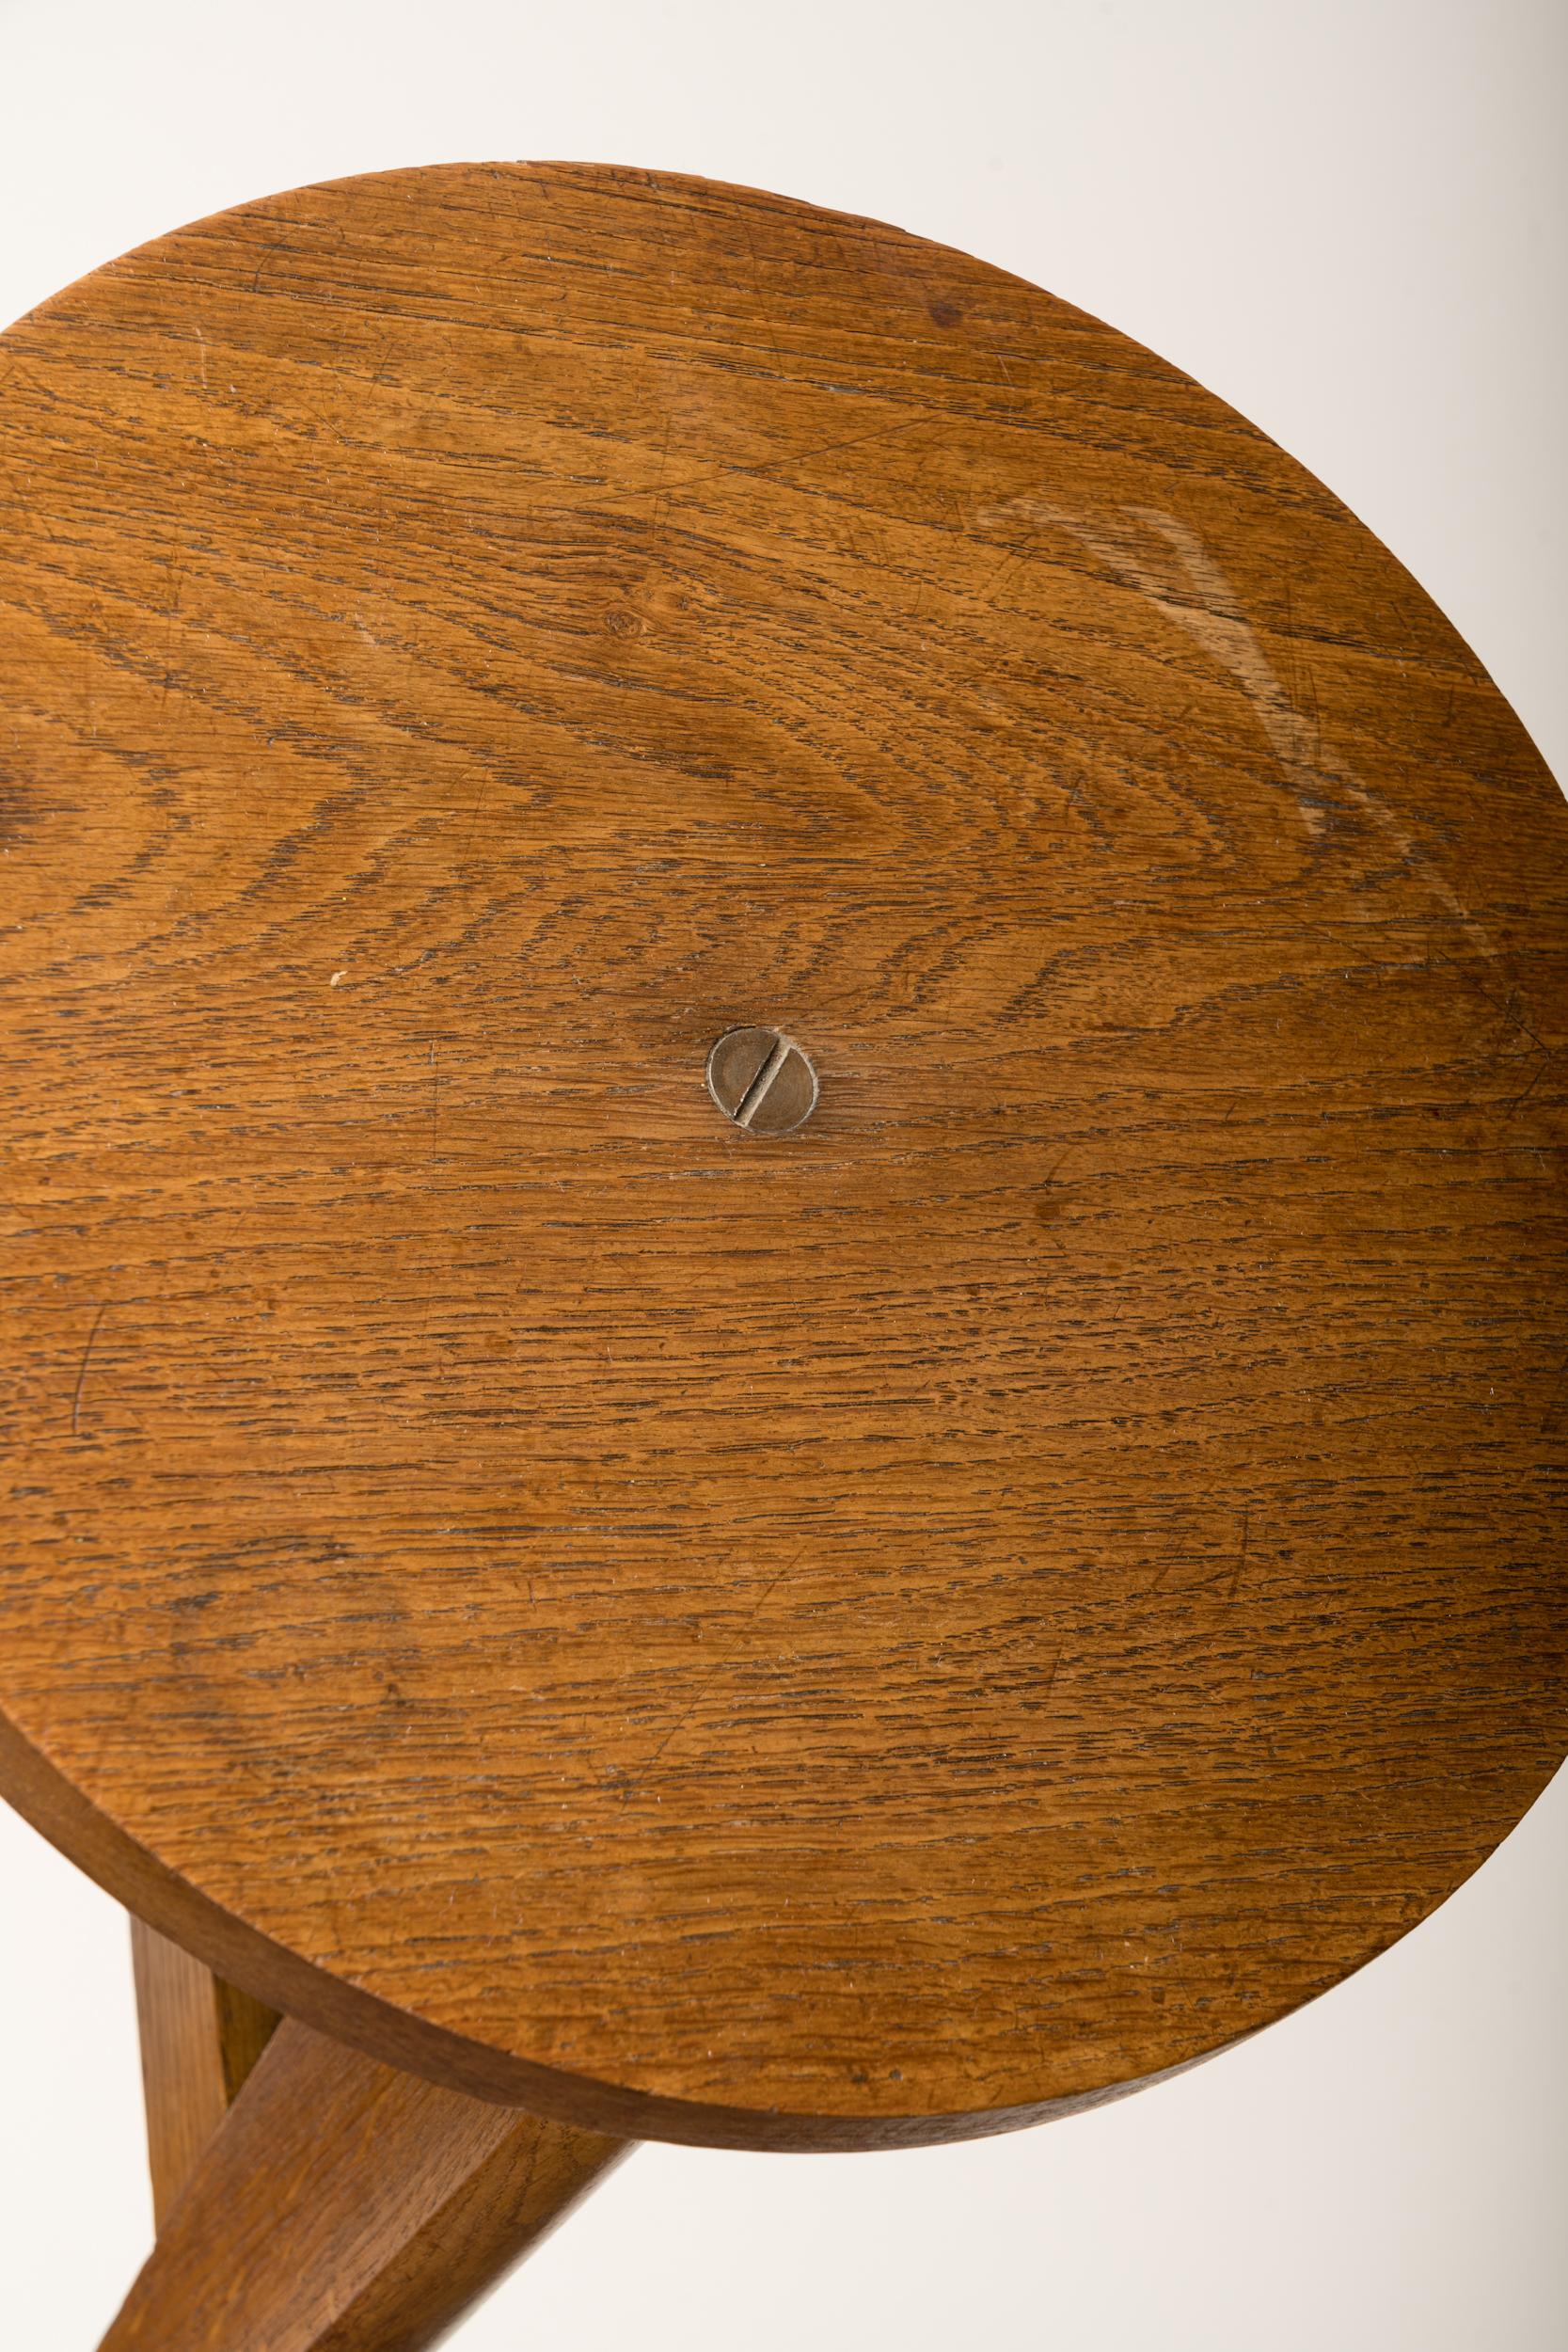 French Four Legged Minimalist Oak Stool in the style of Jeanneret, France 1960's For Sale